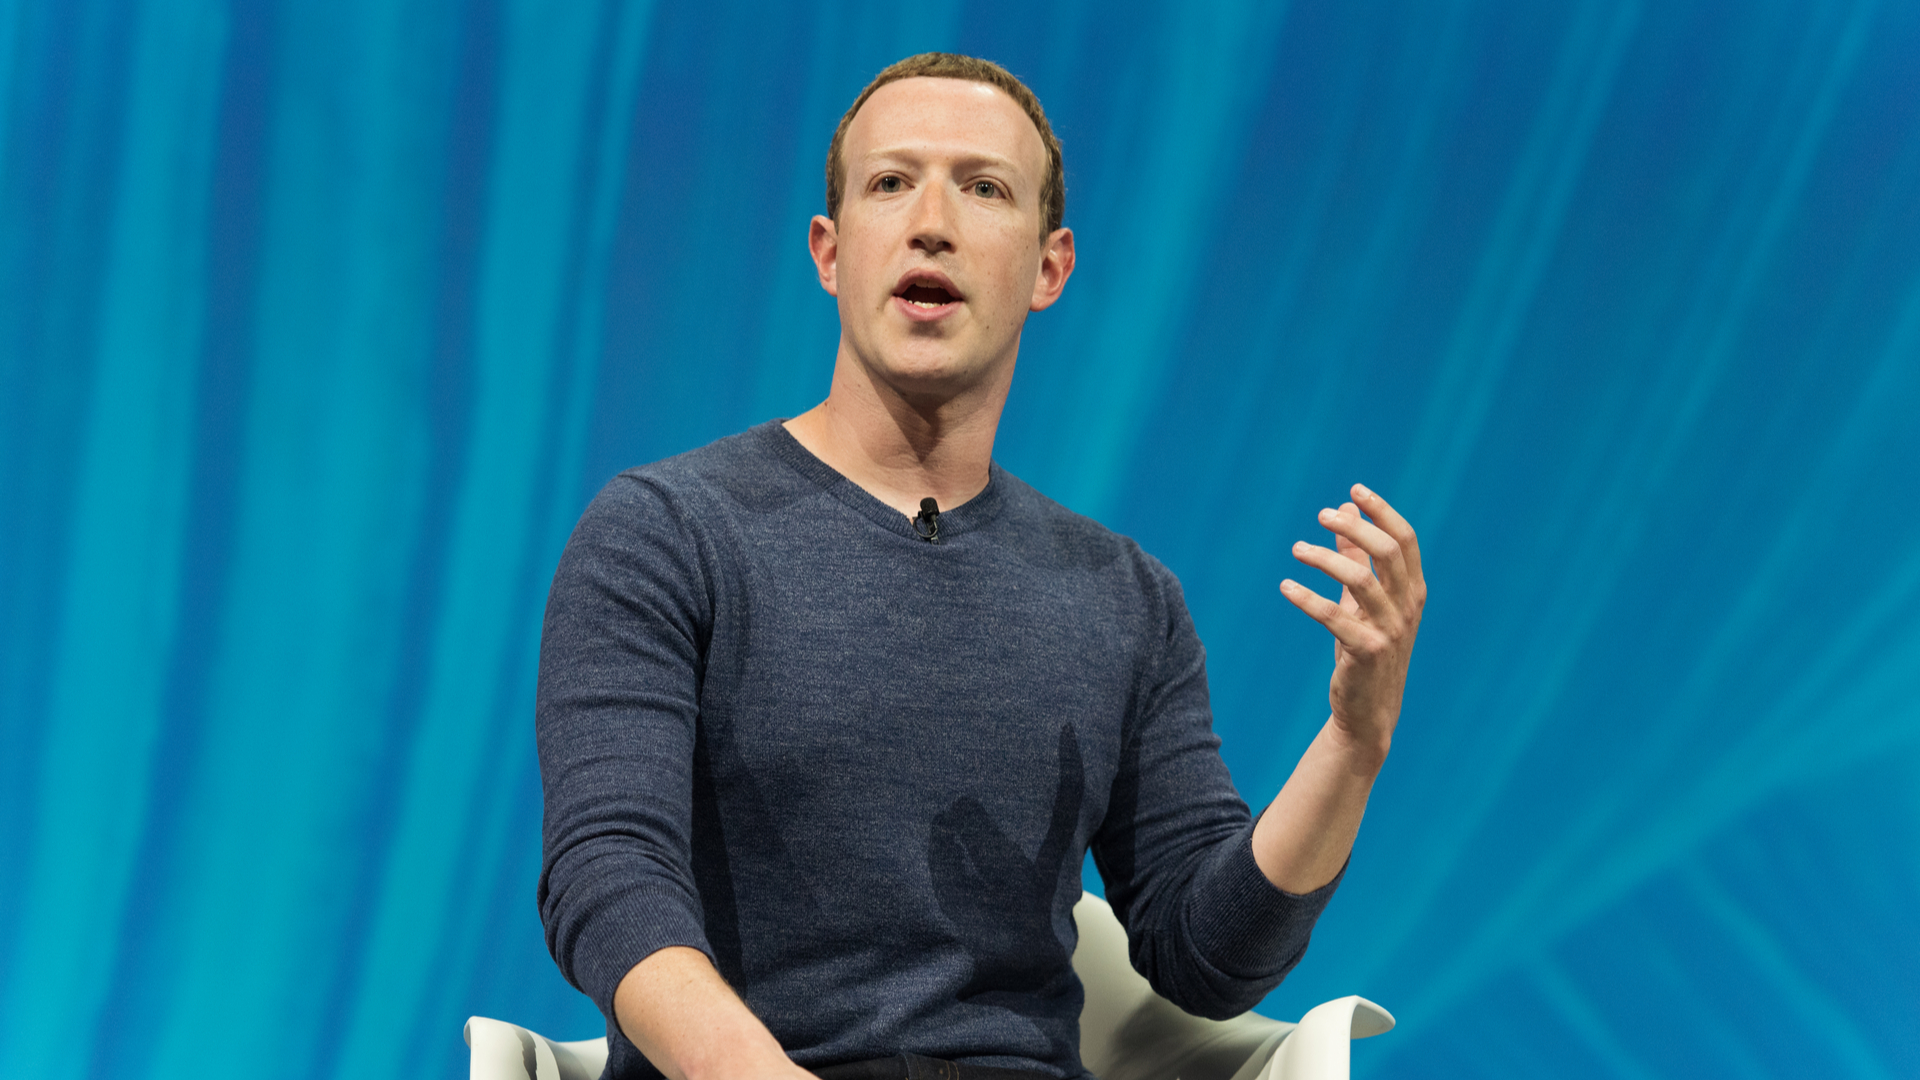 Cloud too expensive for the “vast majority”, claims Zuckerberg post thumbnail image